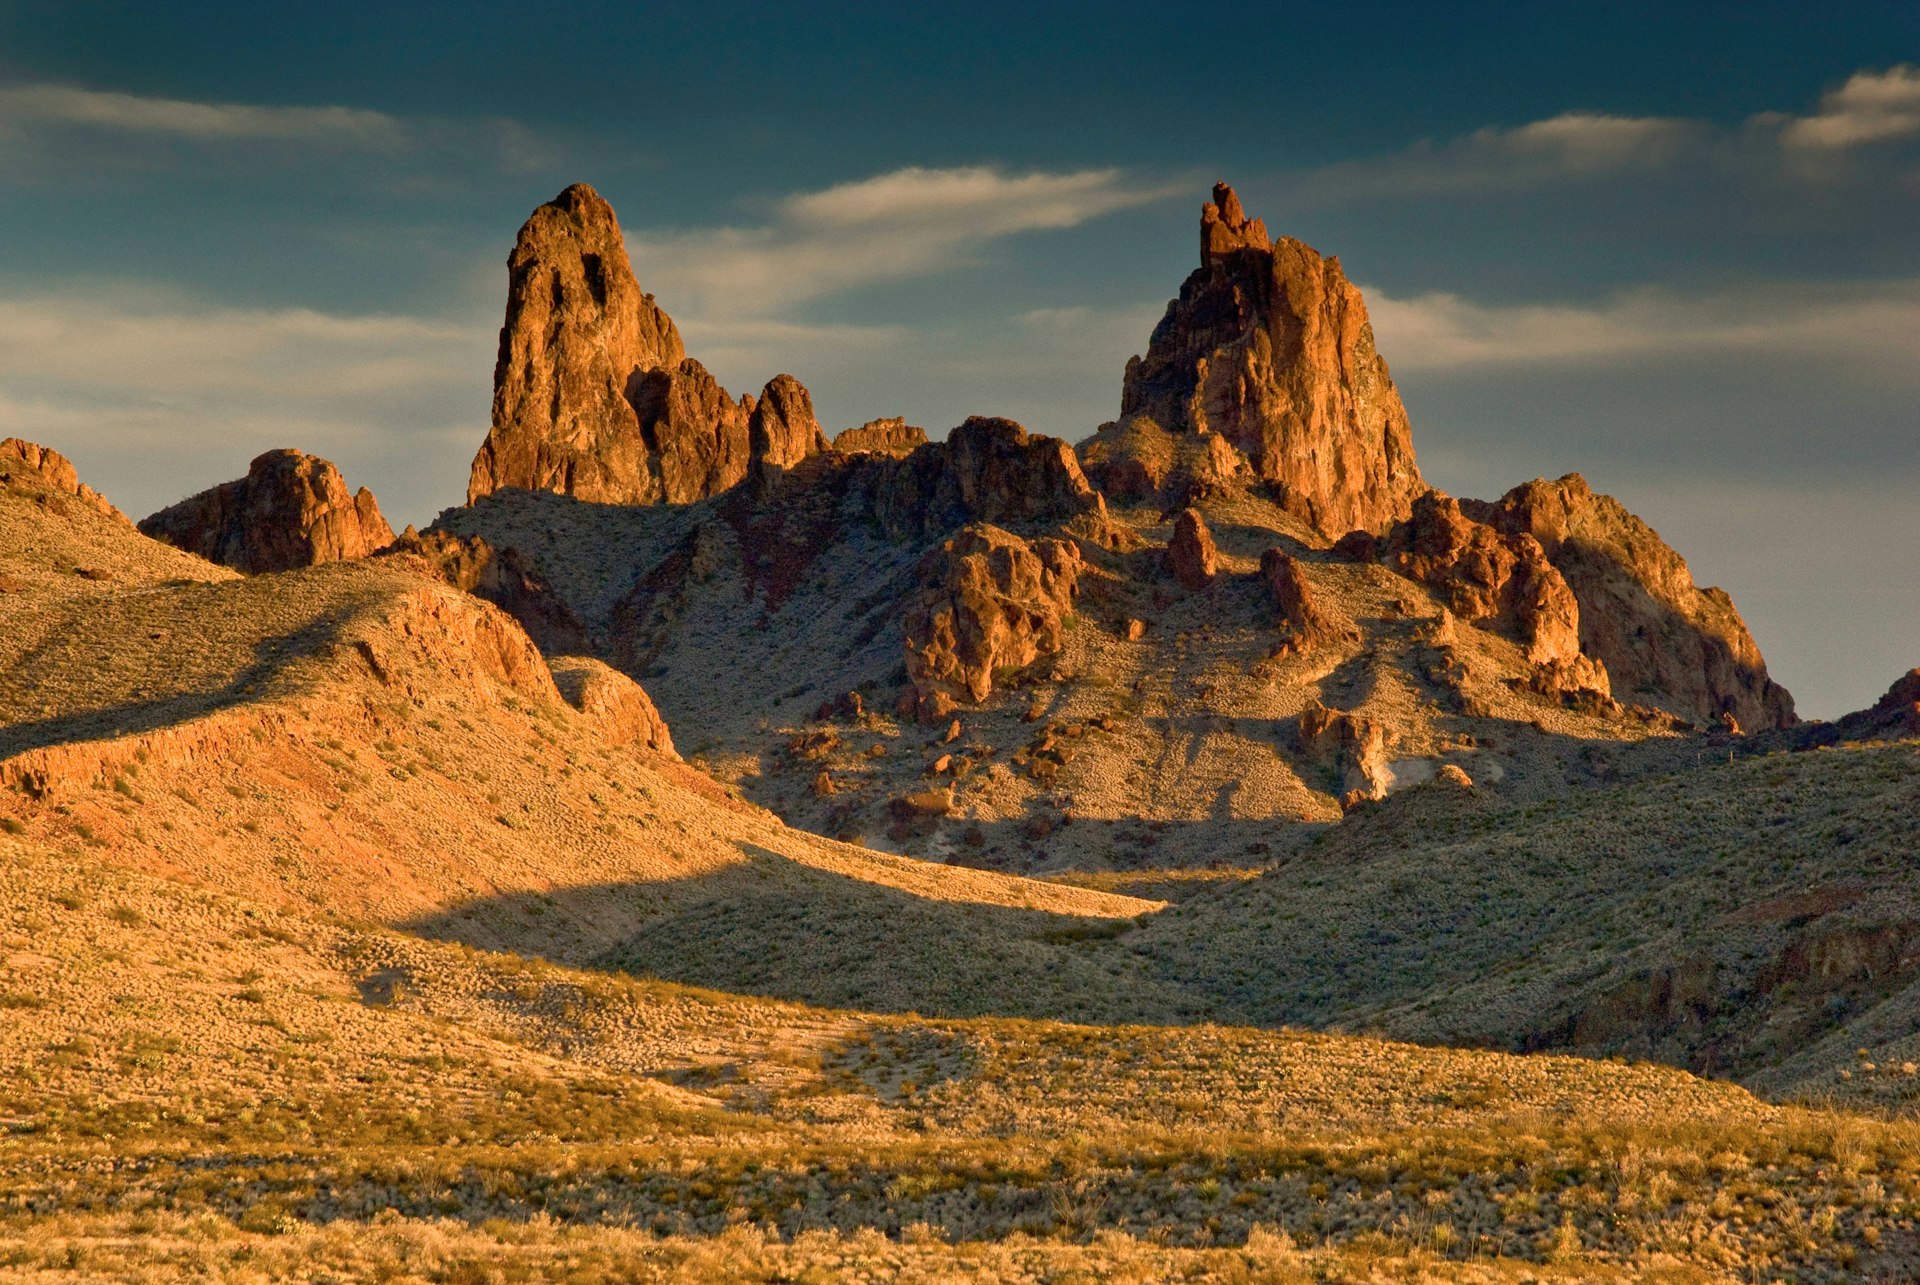 Mule Ears Peaks at sunset, Chihuahuan Desert in Big Bend National Park, Texas, USA